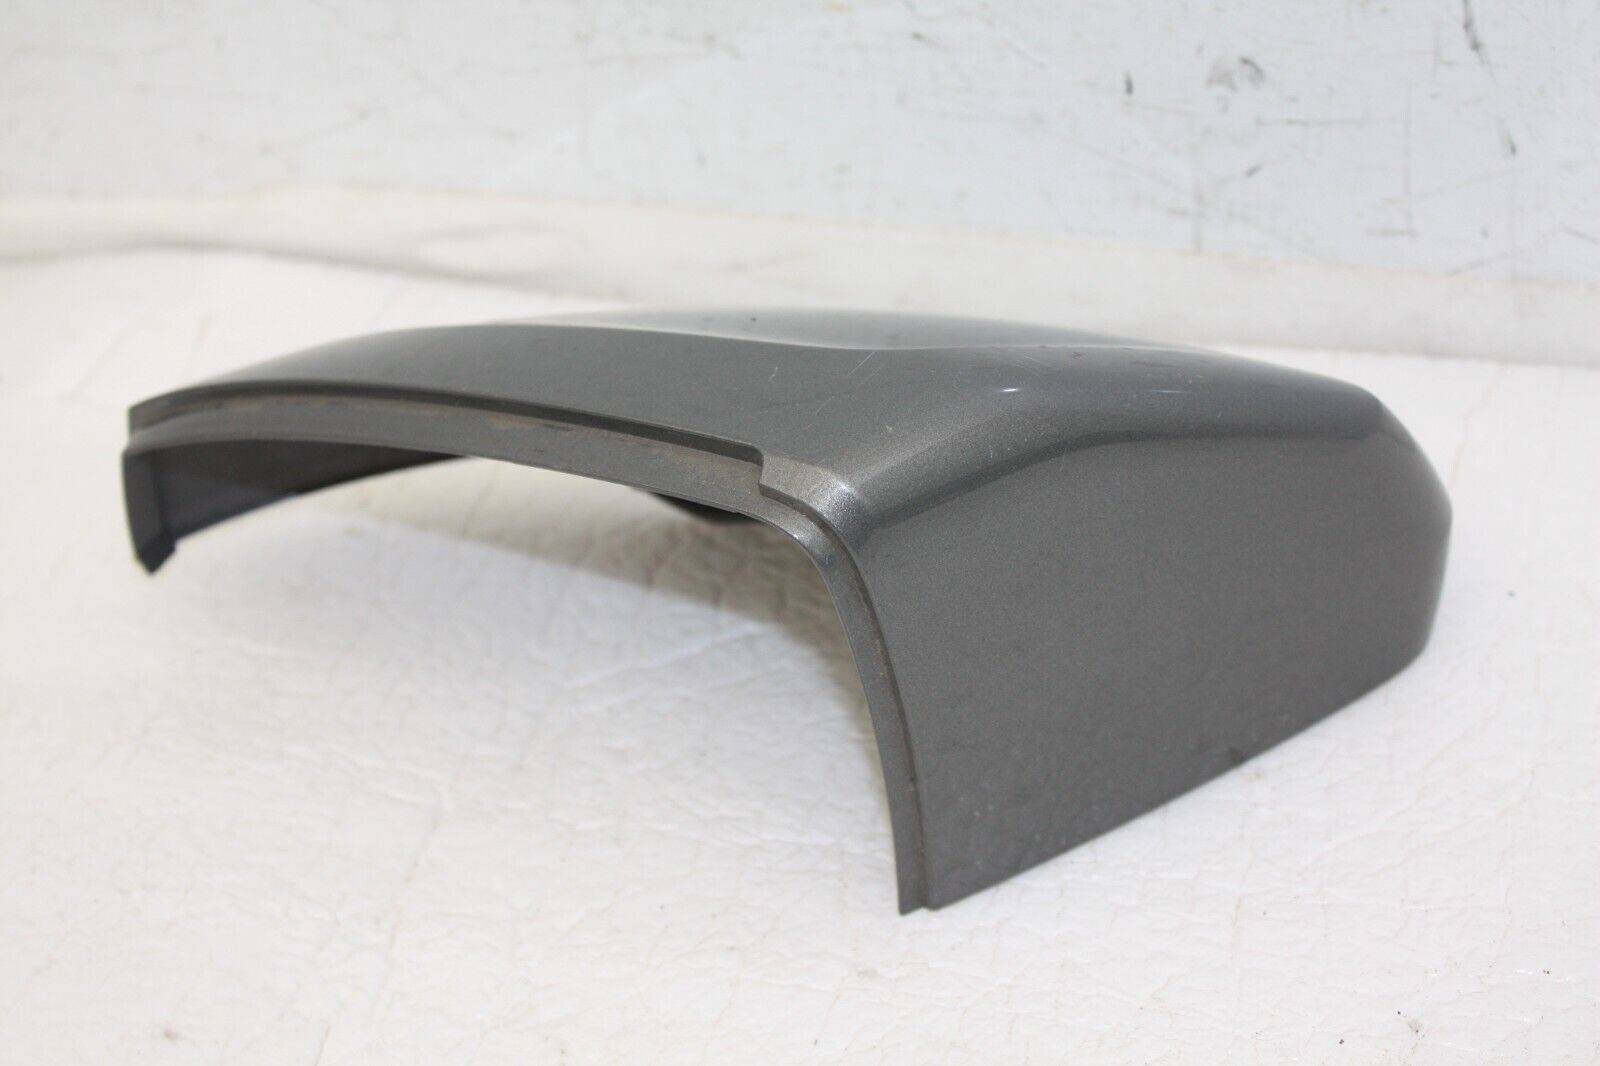 Audi-A1-VW-Polo-Left-Side-Mirror-Cover-2G0857537A-Genuine-176401790996-6